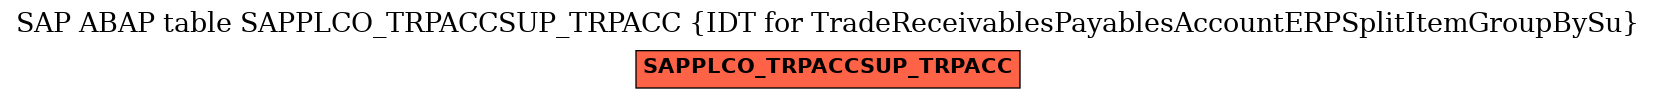 E-R Diagram for table SAPPLCO_TRPACCSUP_TRPACC (IDT for TradeReceivablesPayablesAccountERPSplitItemGroupBySu)